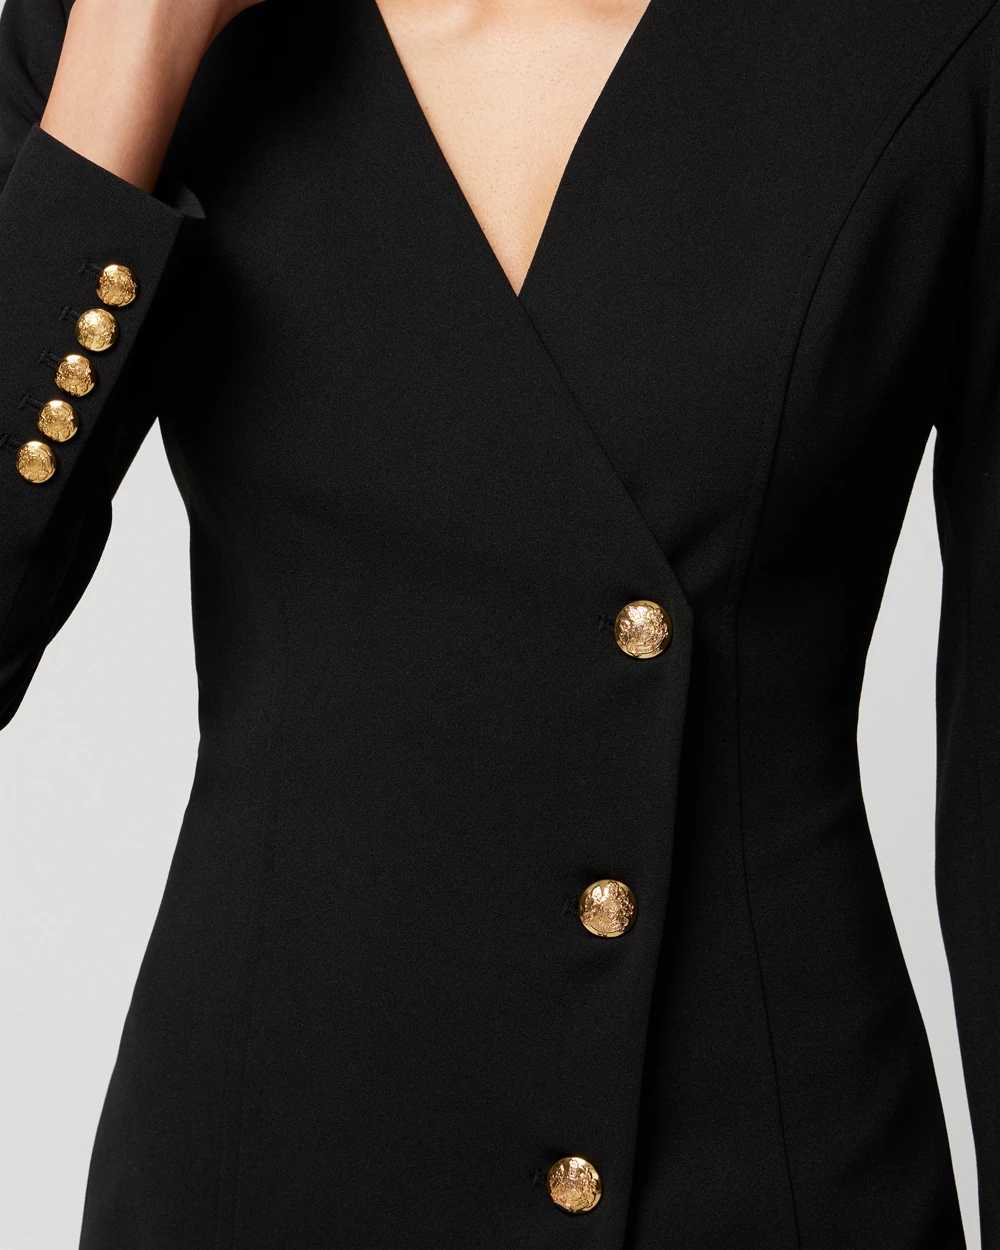 Long Sleeve Blazer Dress click to view larger image.